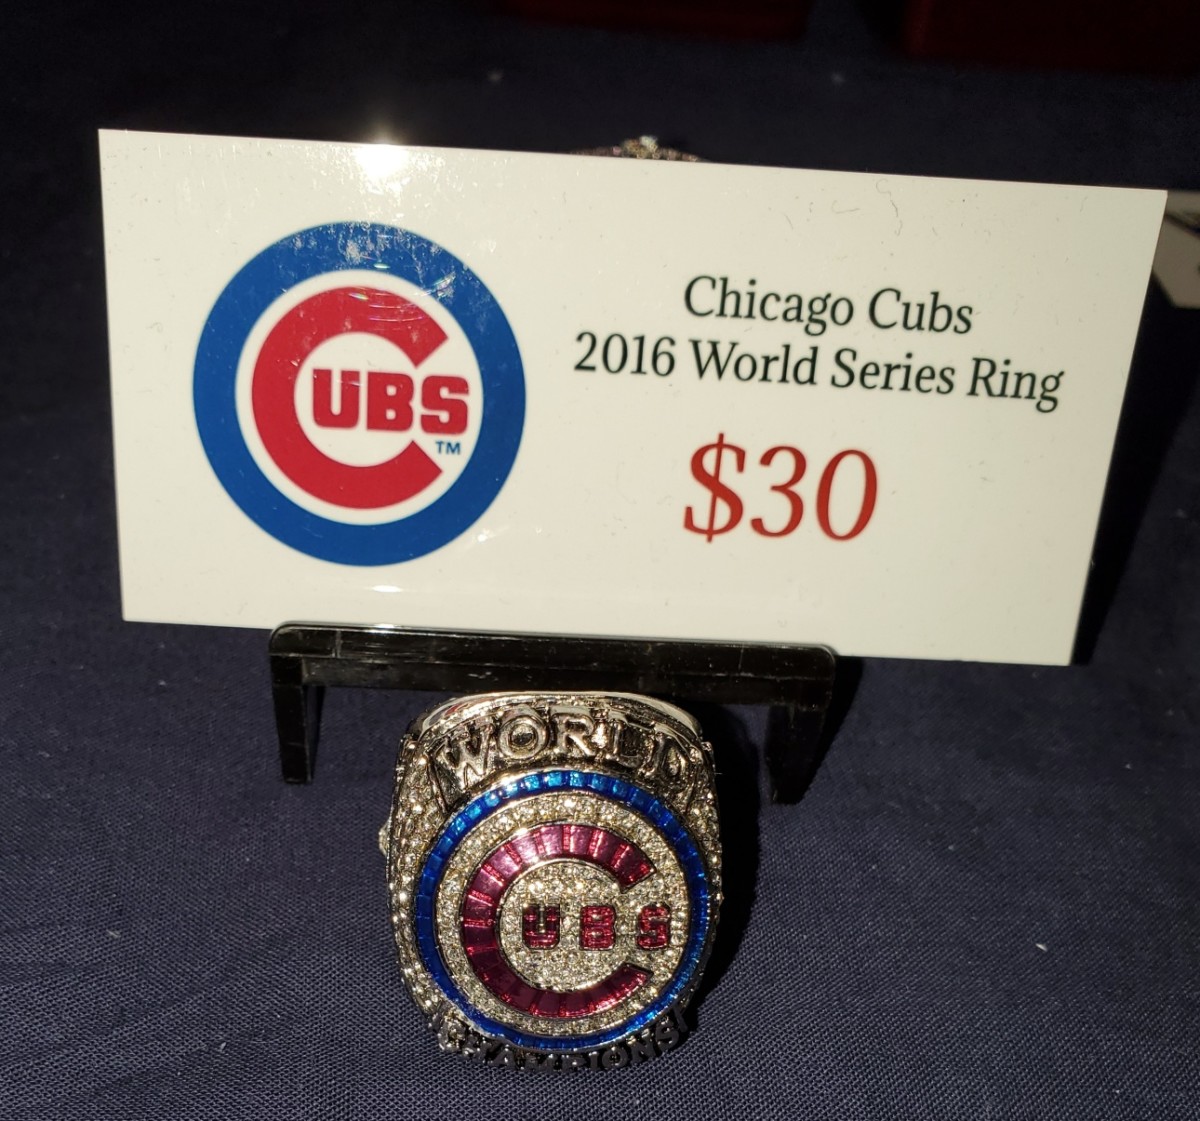 Chicago Cubs 2016 replica World Series rings.